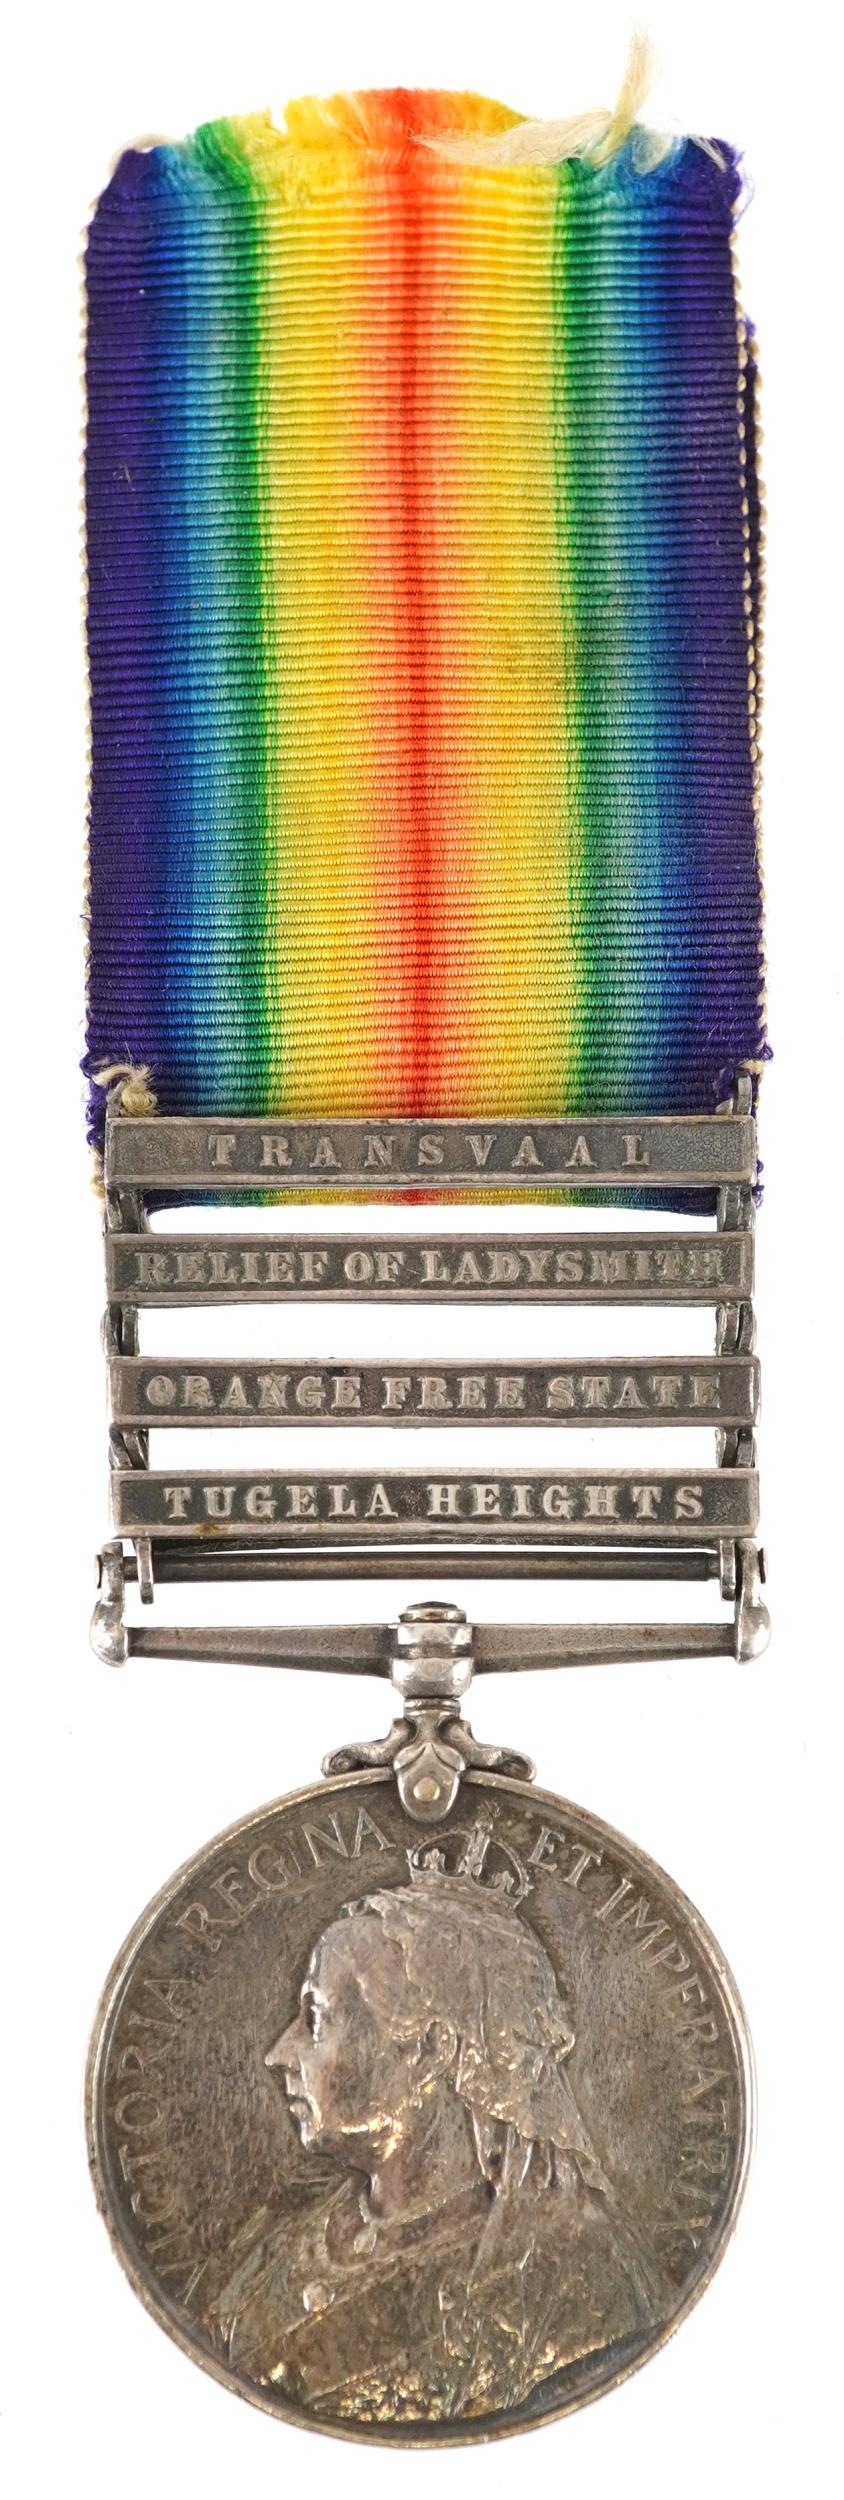 Victorian British military South Africa medal awarded to GNR.G.FITCH.R.F.A with Transvaal Relief - Image 2 of 5